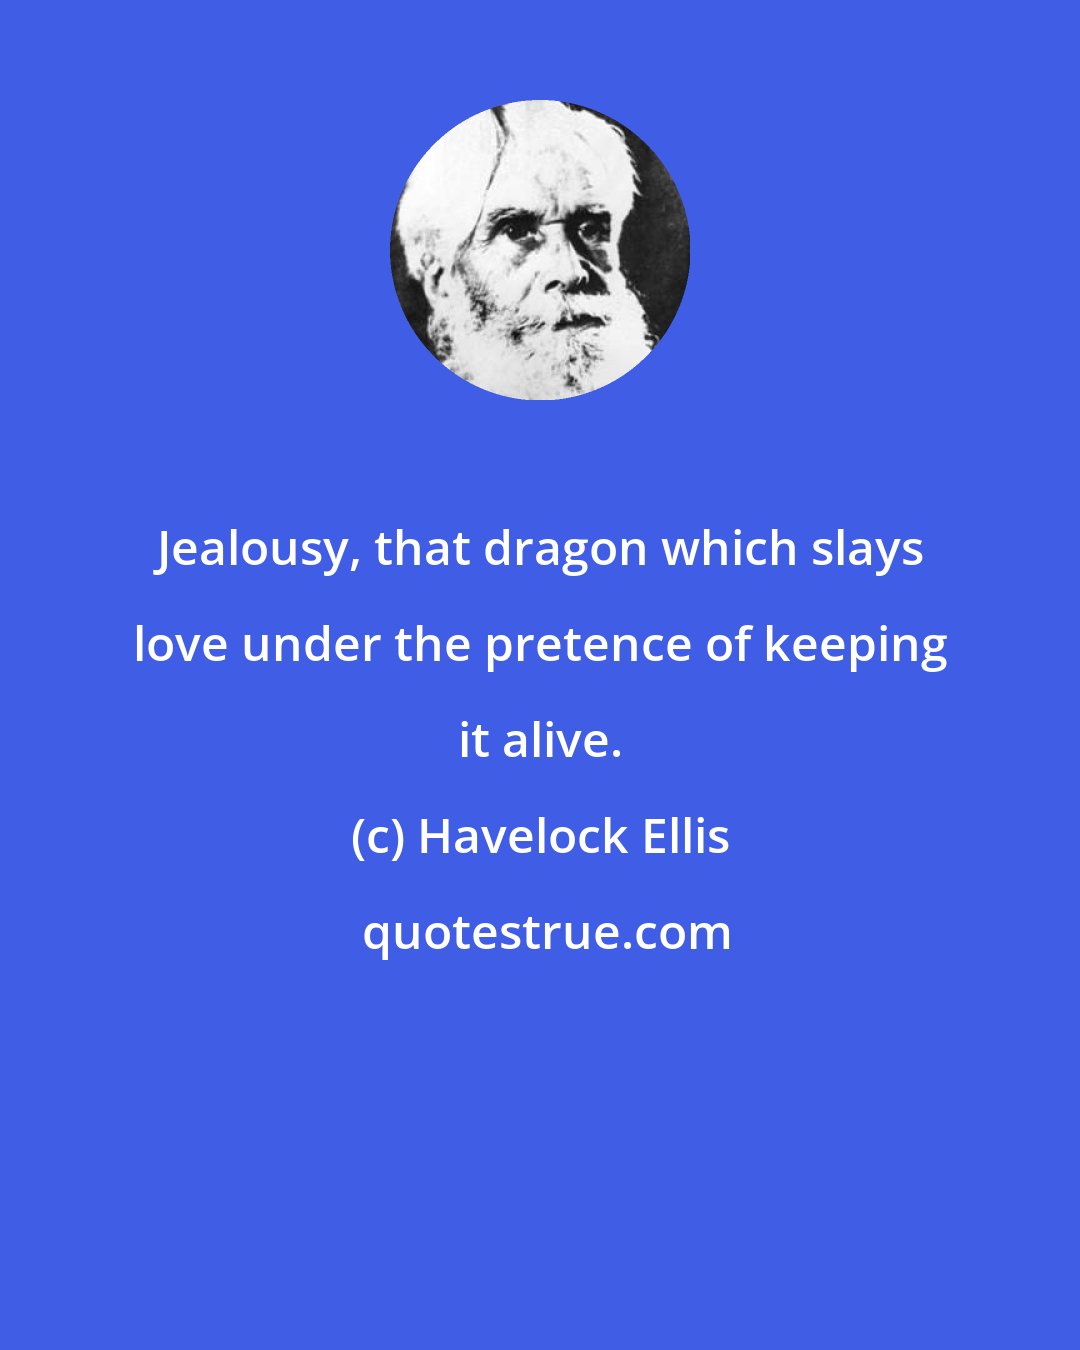 Havelock Ellis: Jealousy, that dragon which slays love under the pretence of keeping it alive.